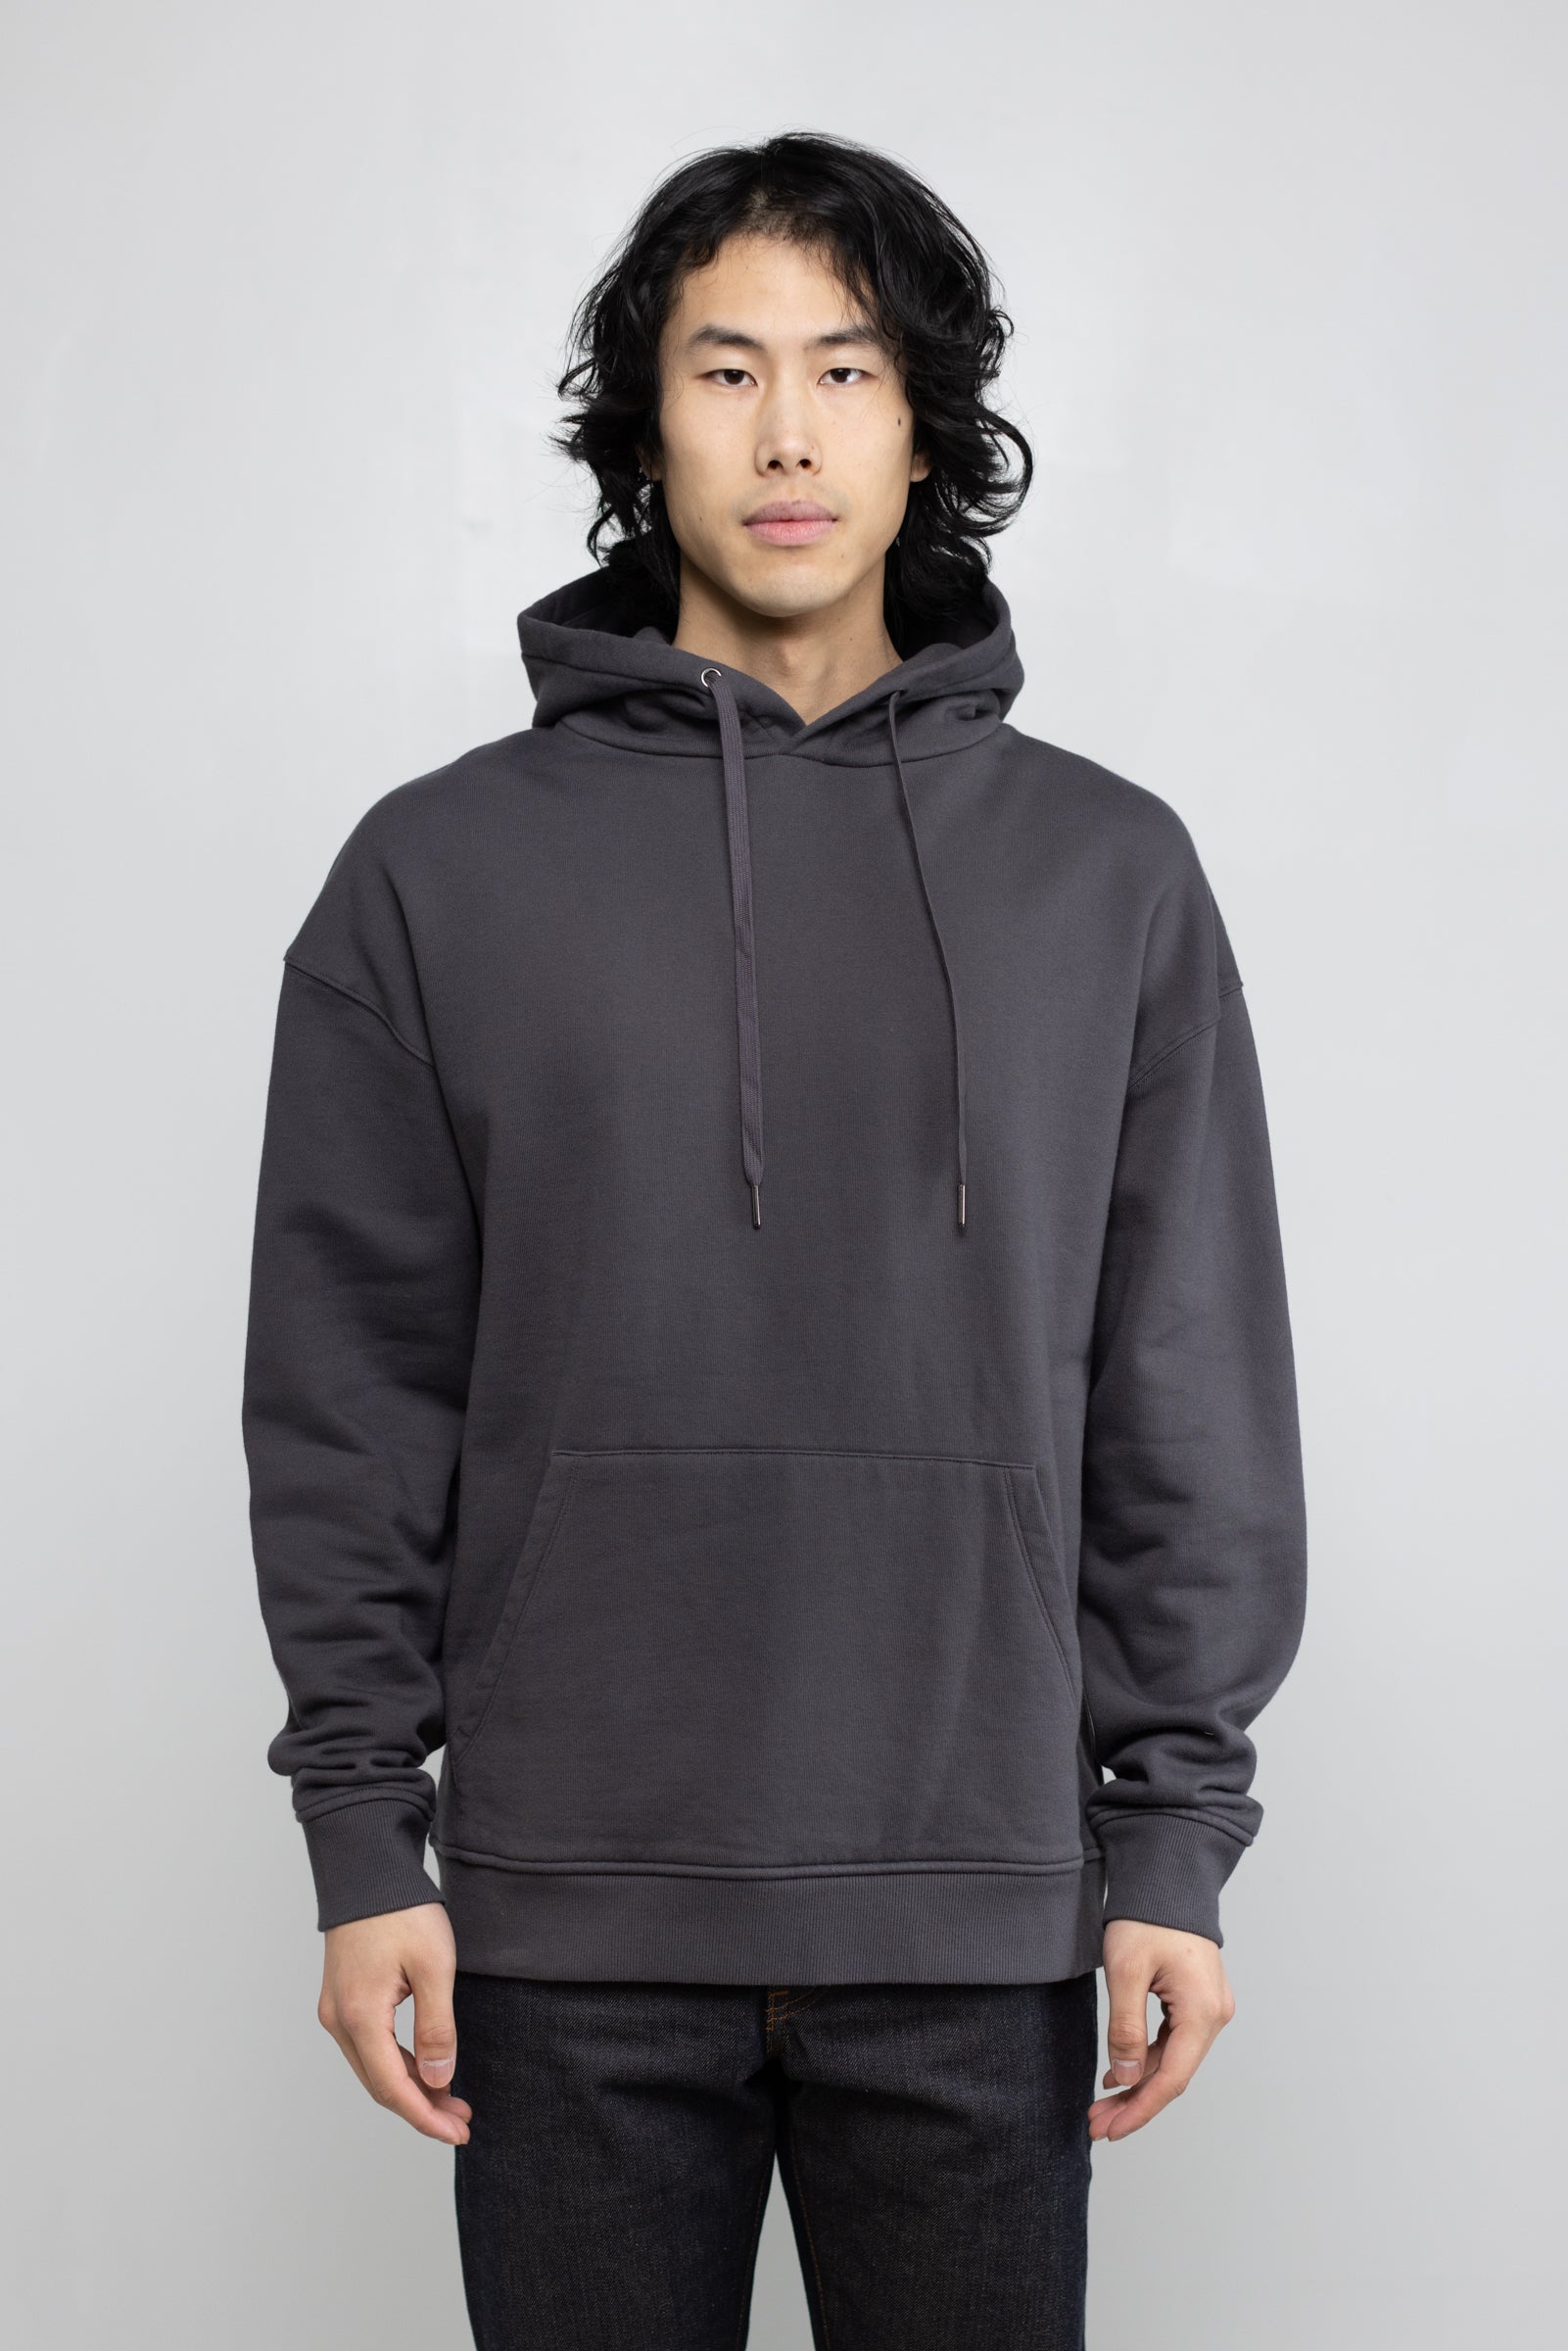 NS2173-3 Cotton Fleece Pullover Hoodie in Ash – National Standards